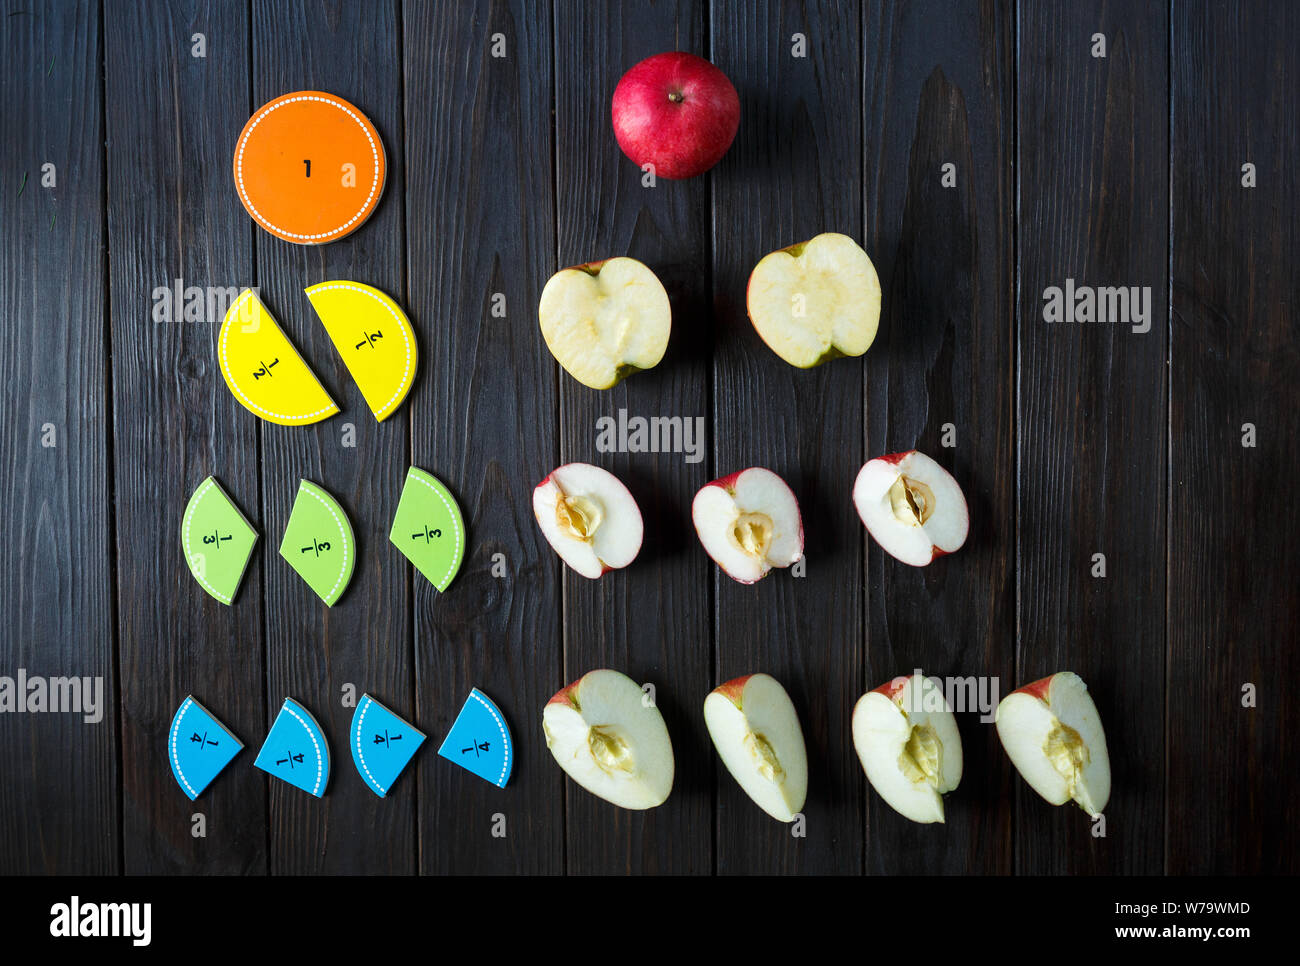 colorful math fractions and apples as a sample on brown wooden background or table. interesting math for kids. Education, back to school concept. Stock Photo